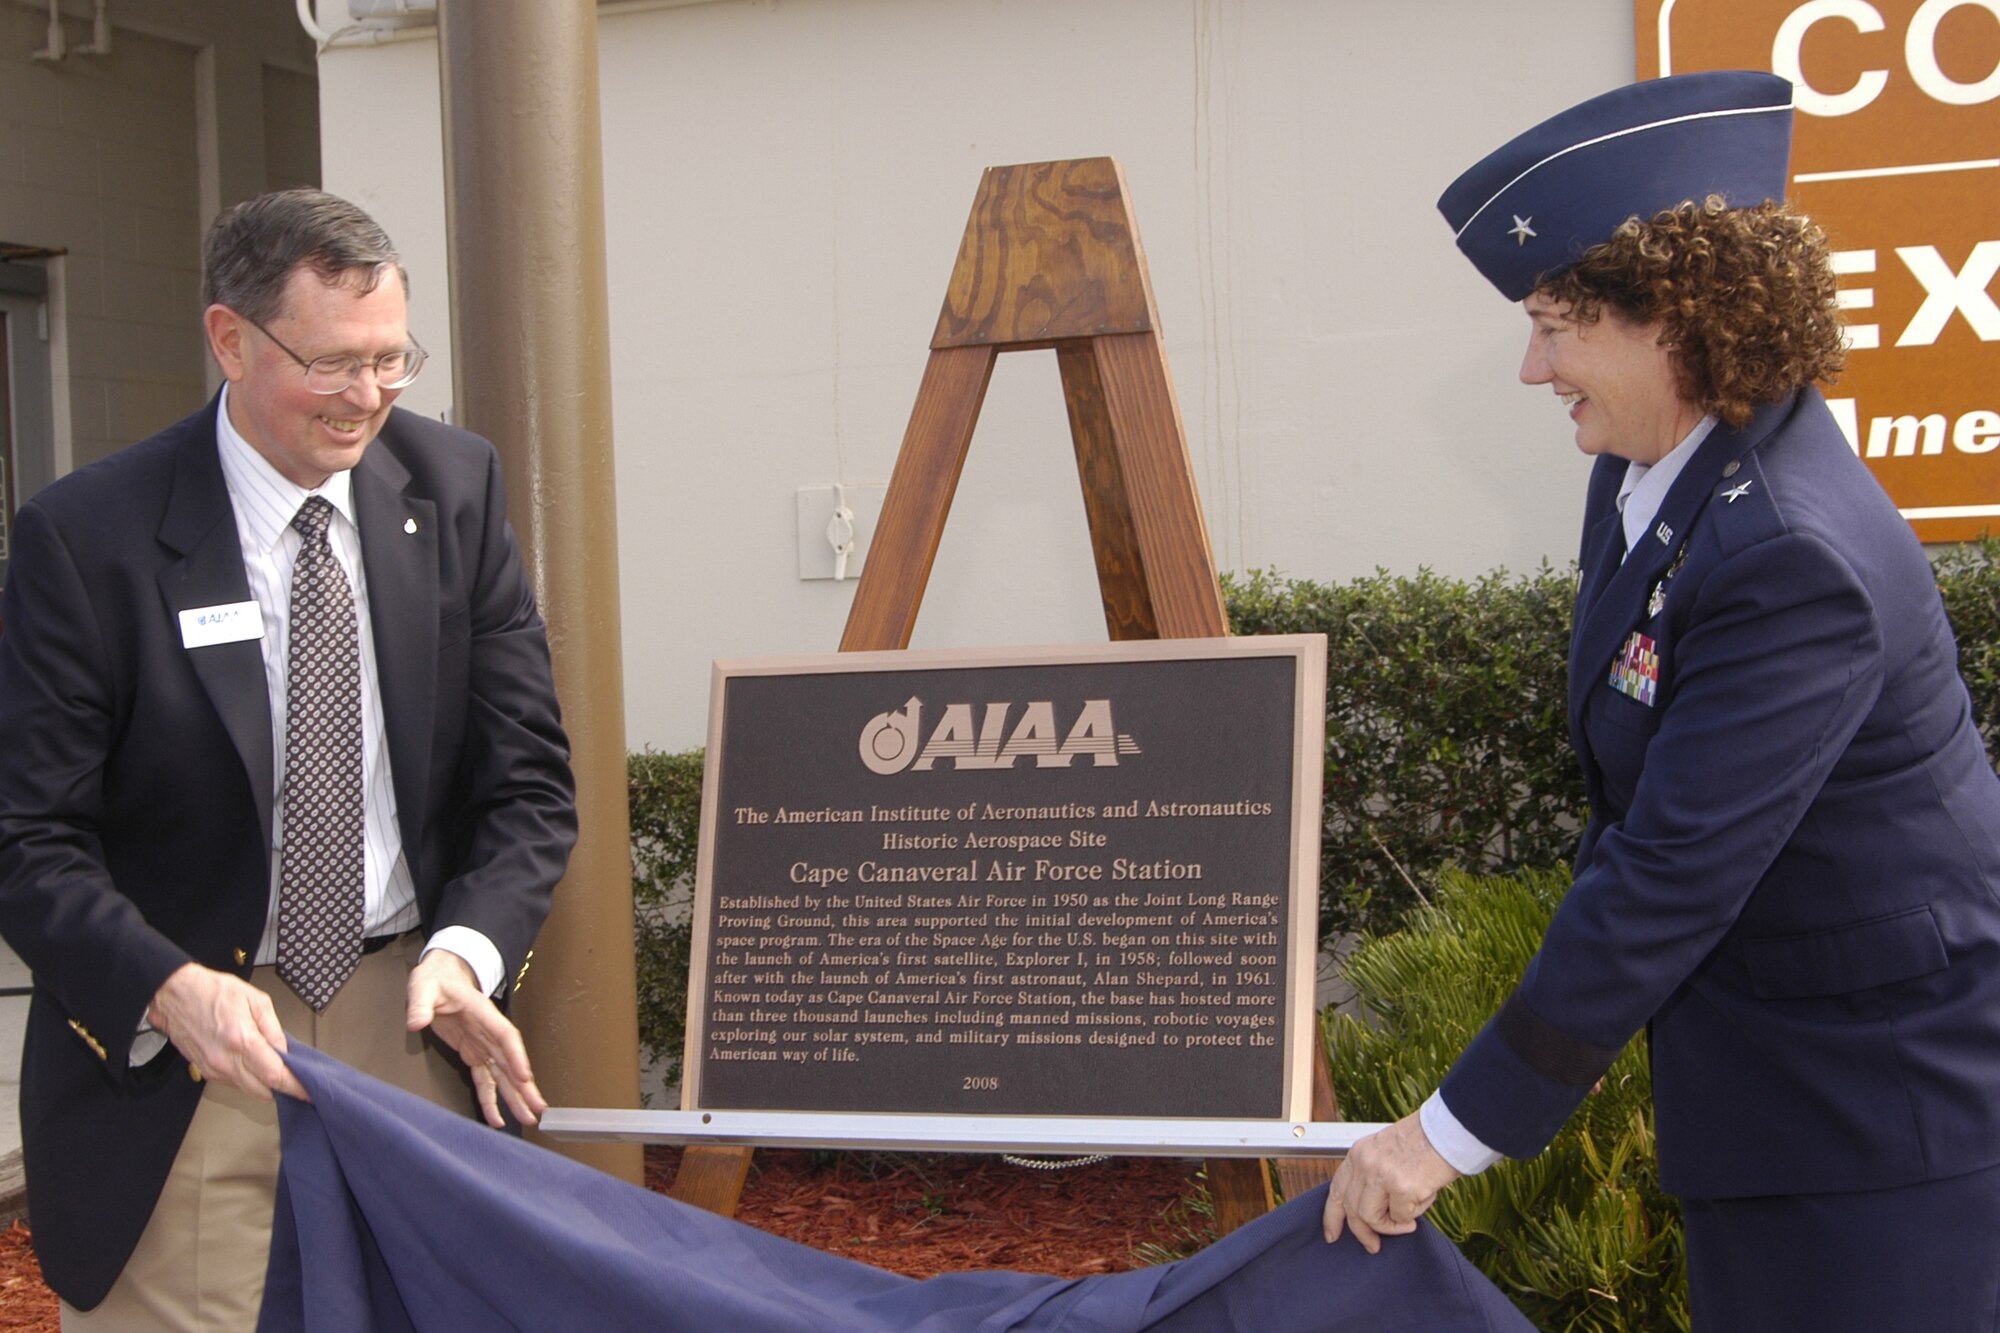 Retired Air Force Maj. Gen. Bob Dickman, executive director of the American Institute of Aeronautics and Astronautics, and Brig. Gen. Susan Helms, 45th Space Wing commander, unveil a marker designating Cape Canaveral AFS as a Historic Aerospace Site. (U.S. Air Force photo by Regina Mitchell-Ryall)